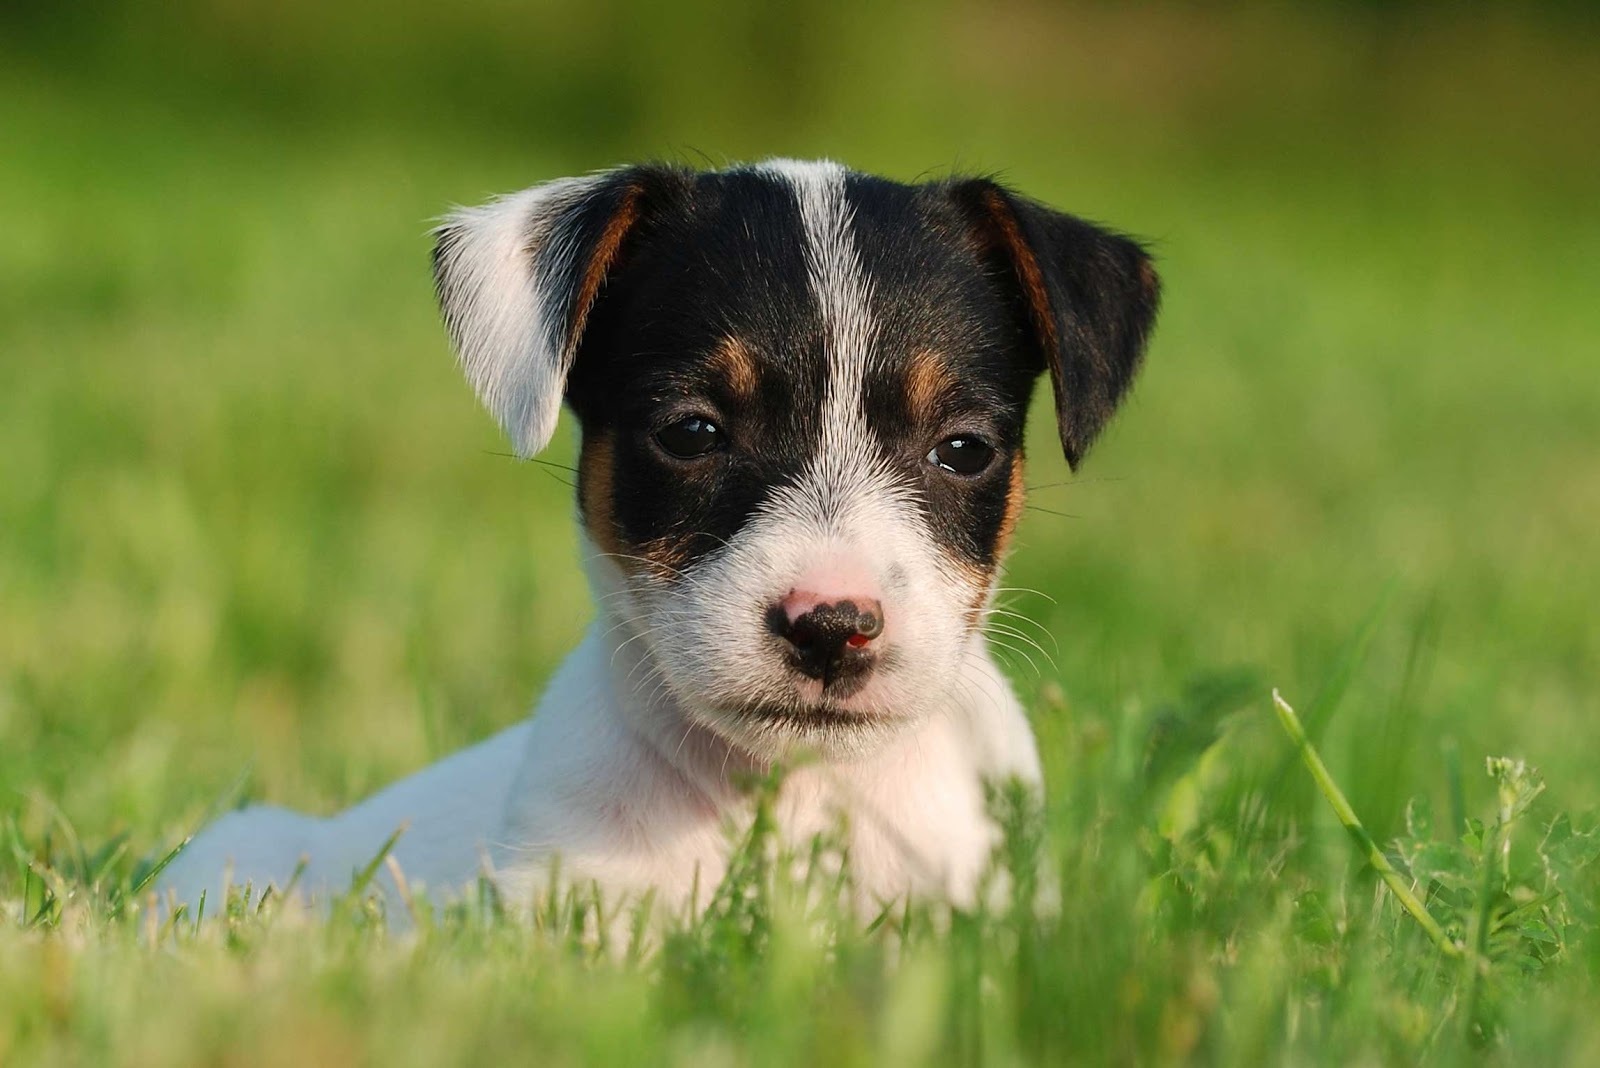 Adorable-jack-russell-puppy-dog-breed-wallpaper - Dog Breeders Guide